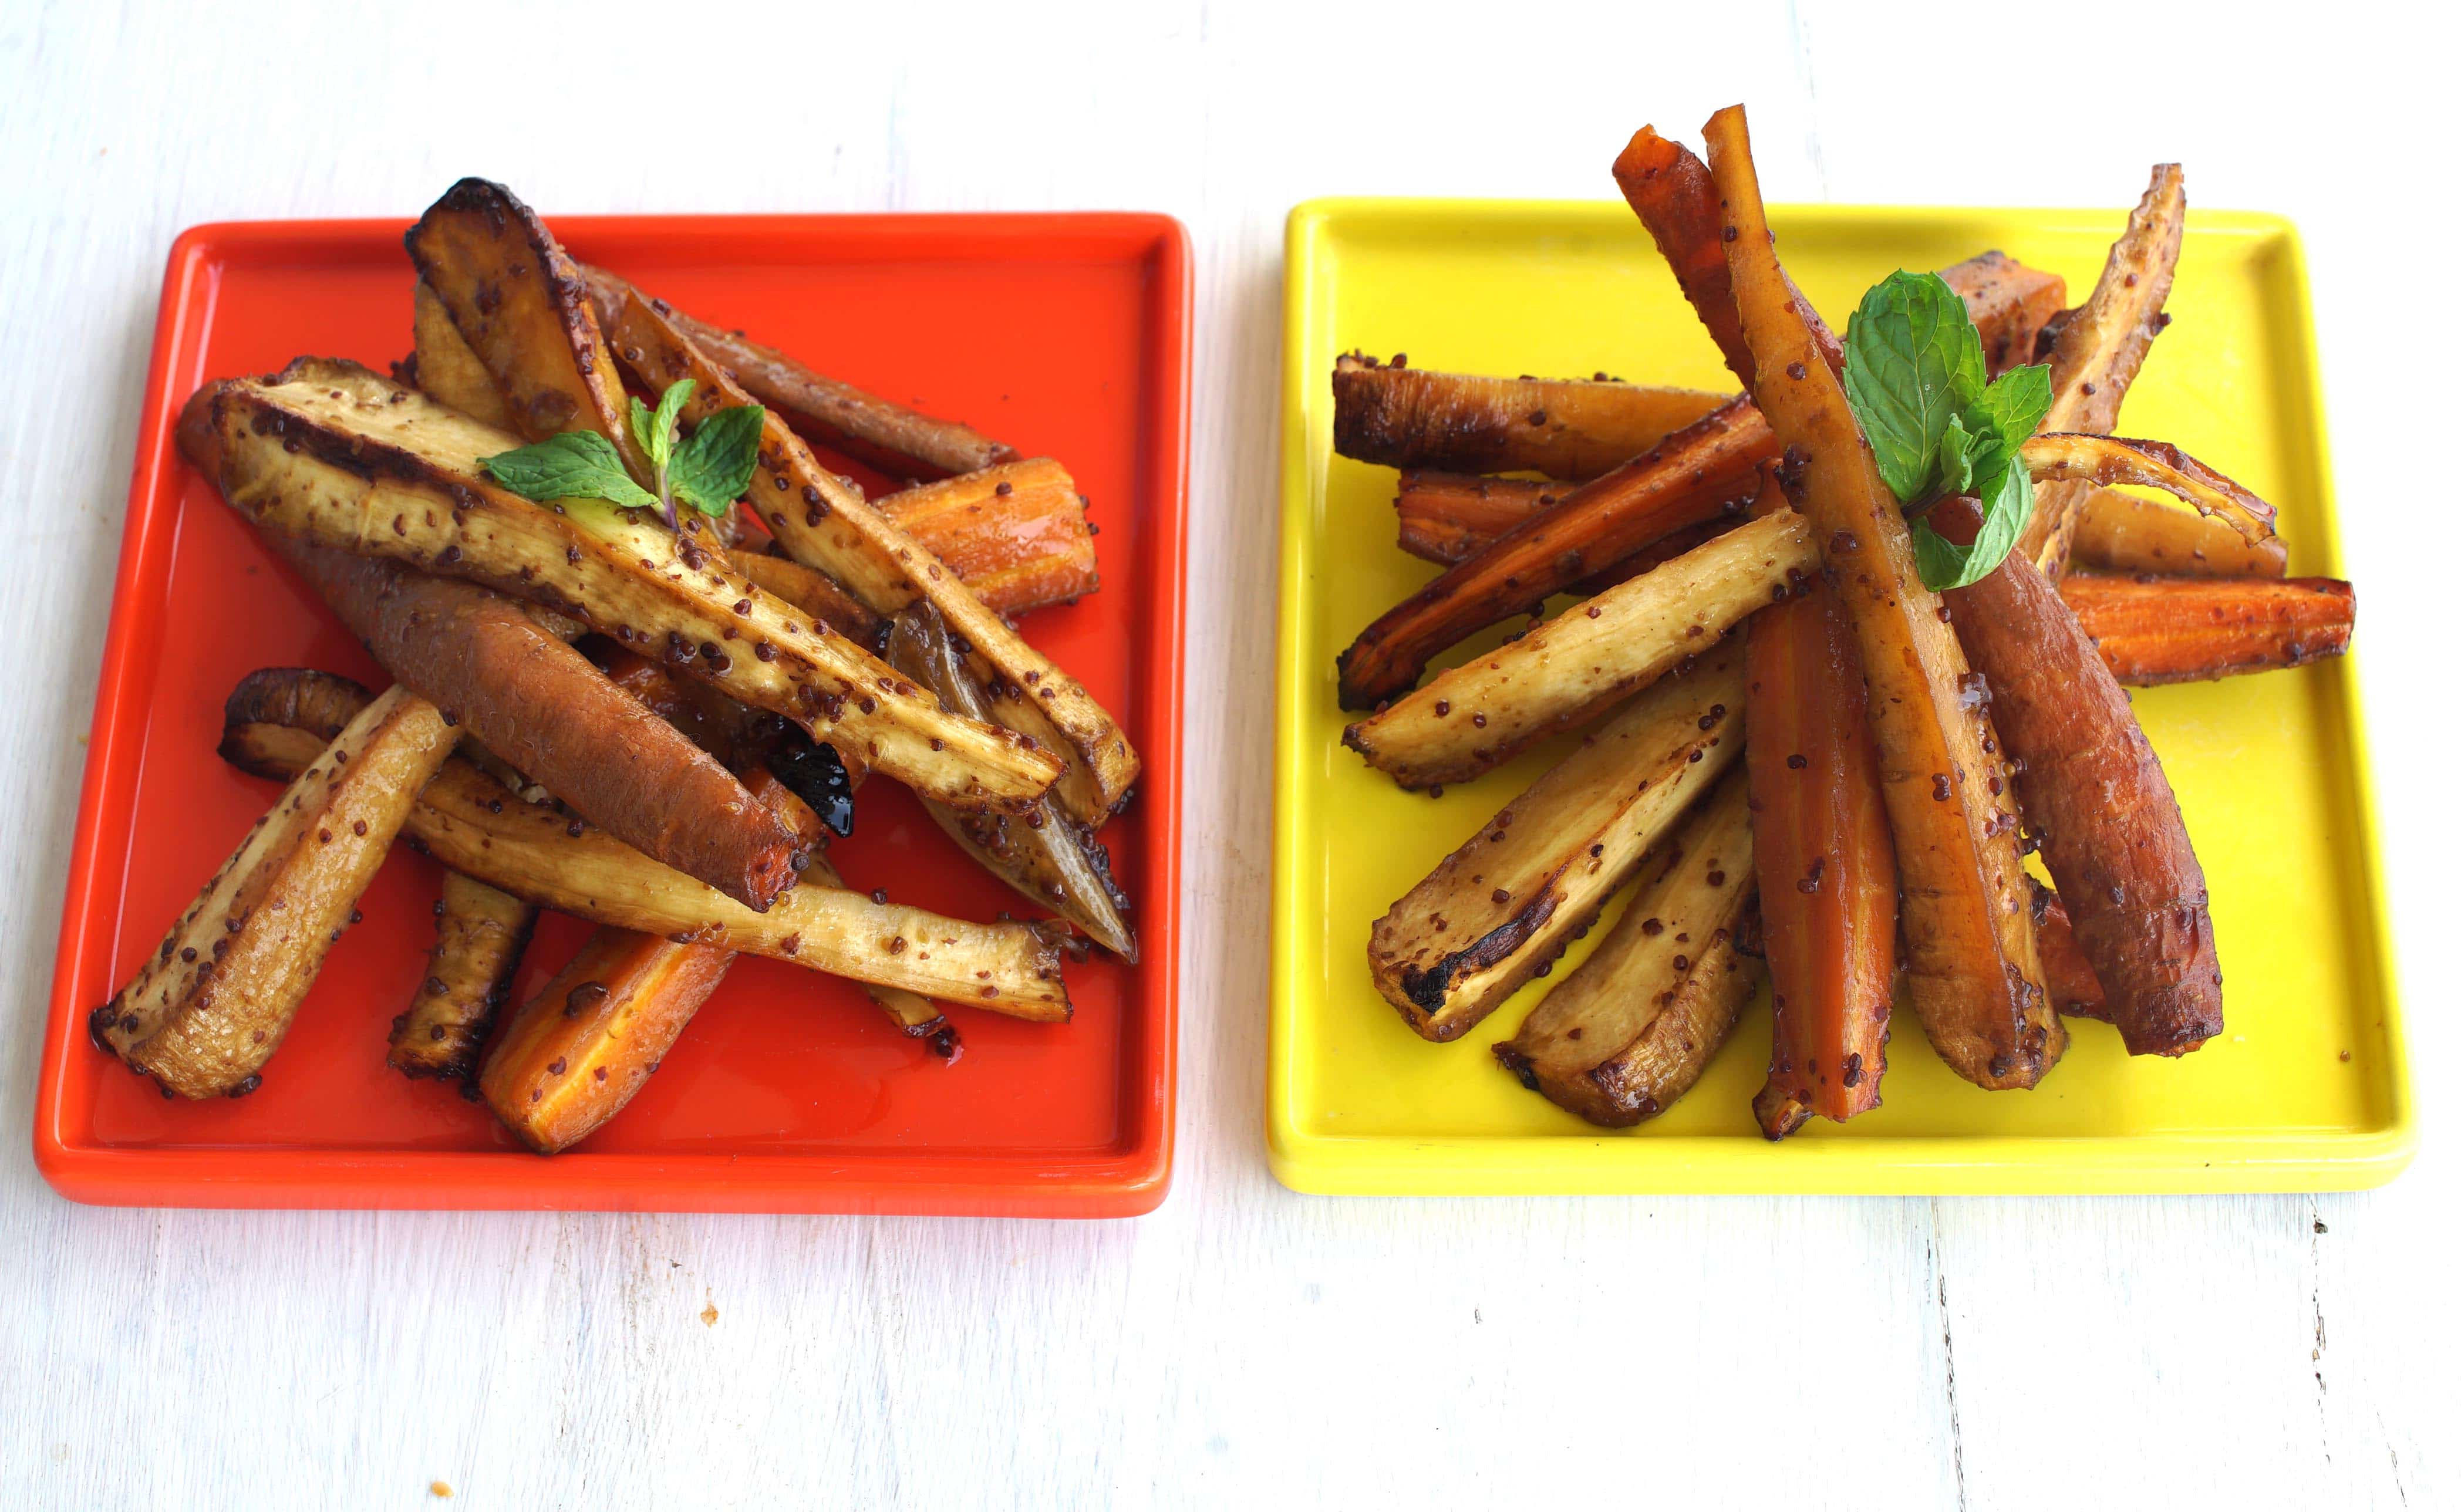 Roasted-carrots-parsnips-recipe-starters-sides-1